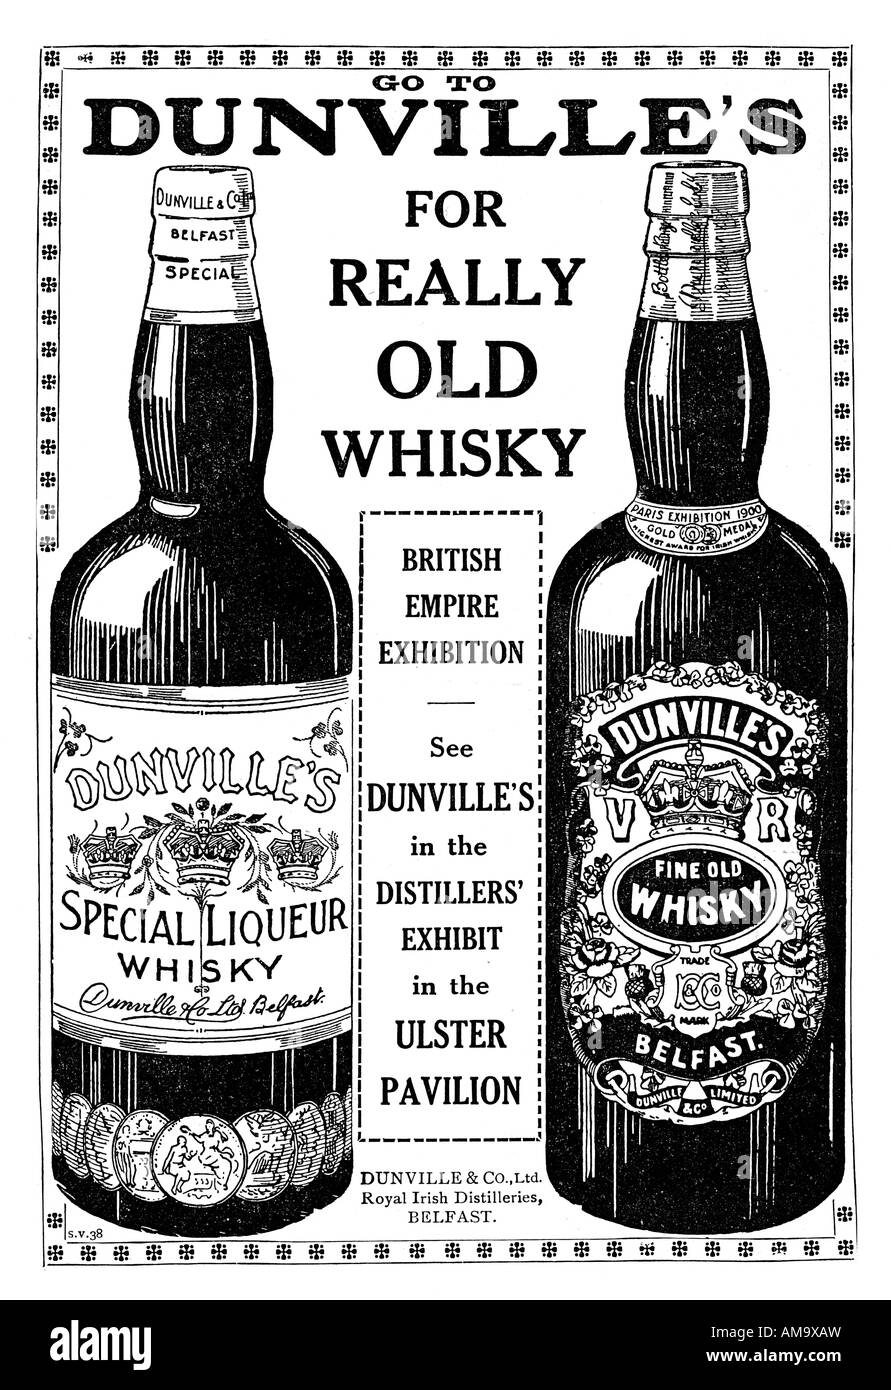 Dunvilles Irish Whisky 1902 advert for the whiskey from Royal Irish Distillers in Belfast Stock Photo